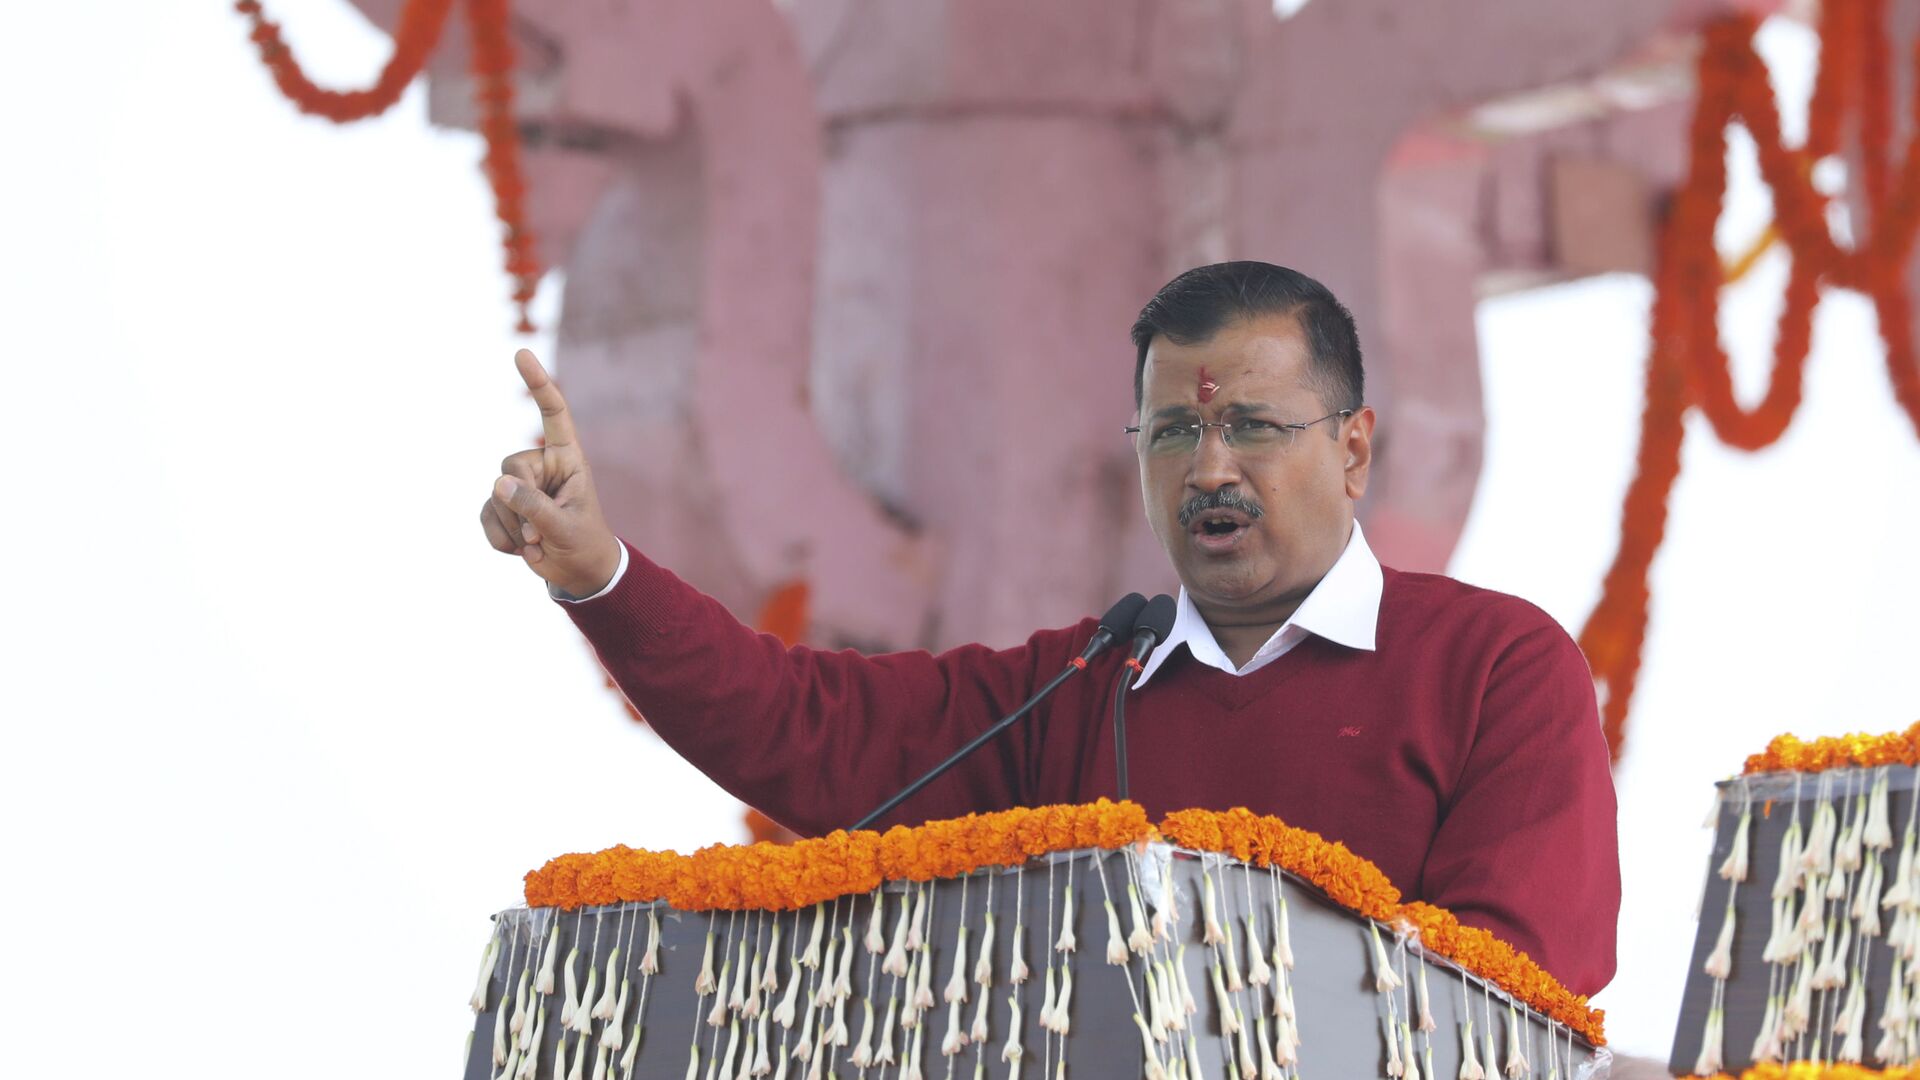 Aam Aadmi Party, or Common Man's Party, leader Arvind Kejriwal addresses the crowd after taking oath as Chief Minister of Delhi for the third time, in New Delhi, India, Sunday, Feb. 16, 2020 - Sputnik International, 1920, 06.10.2021